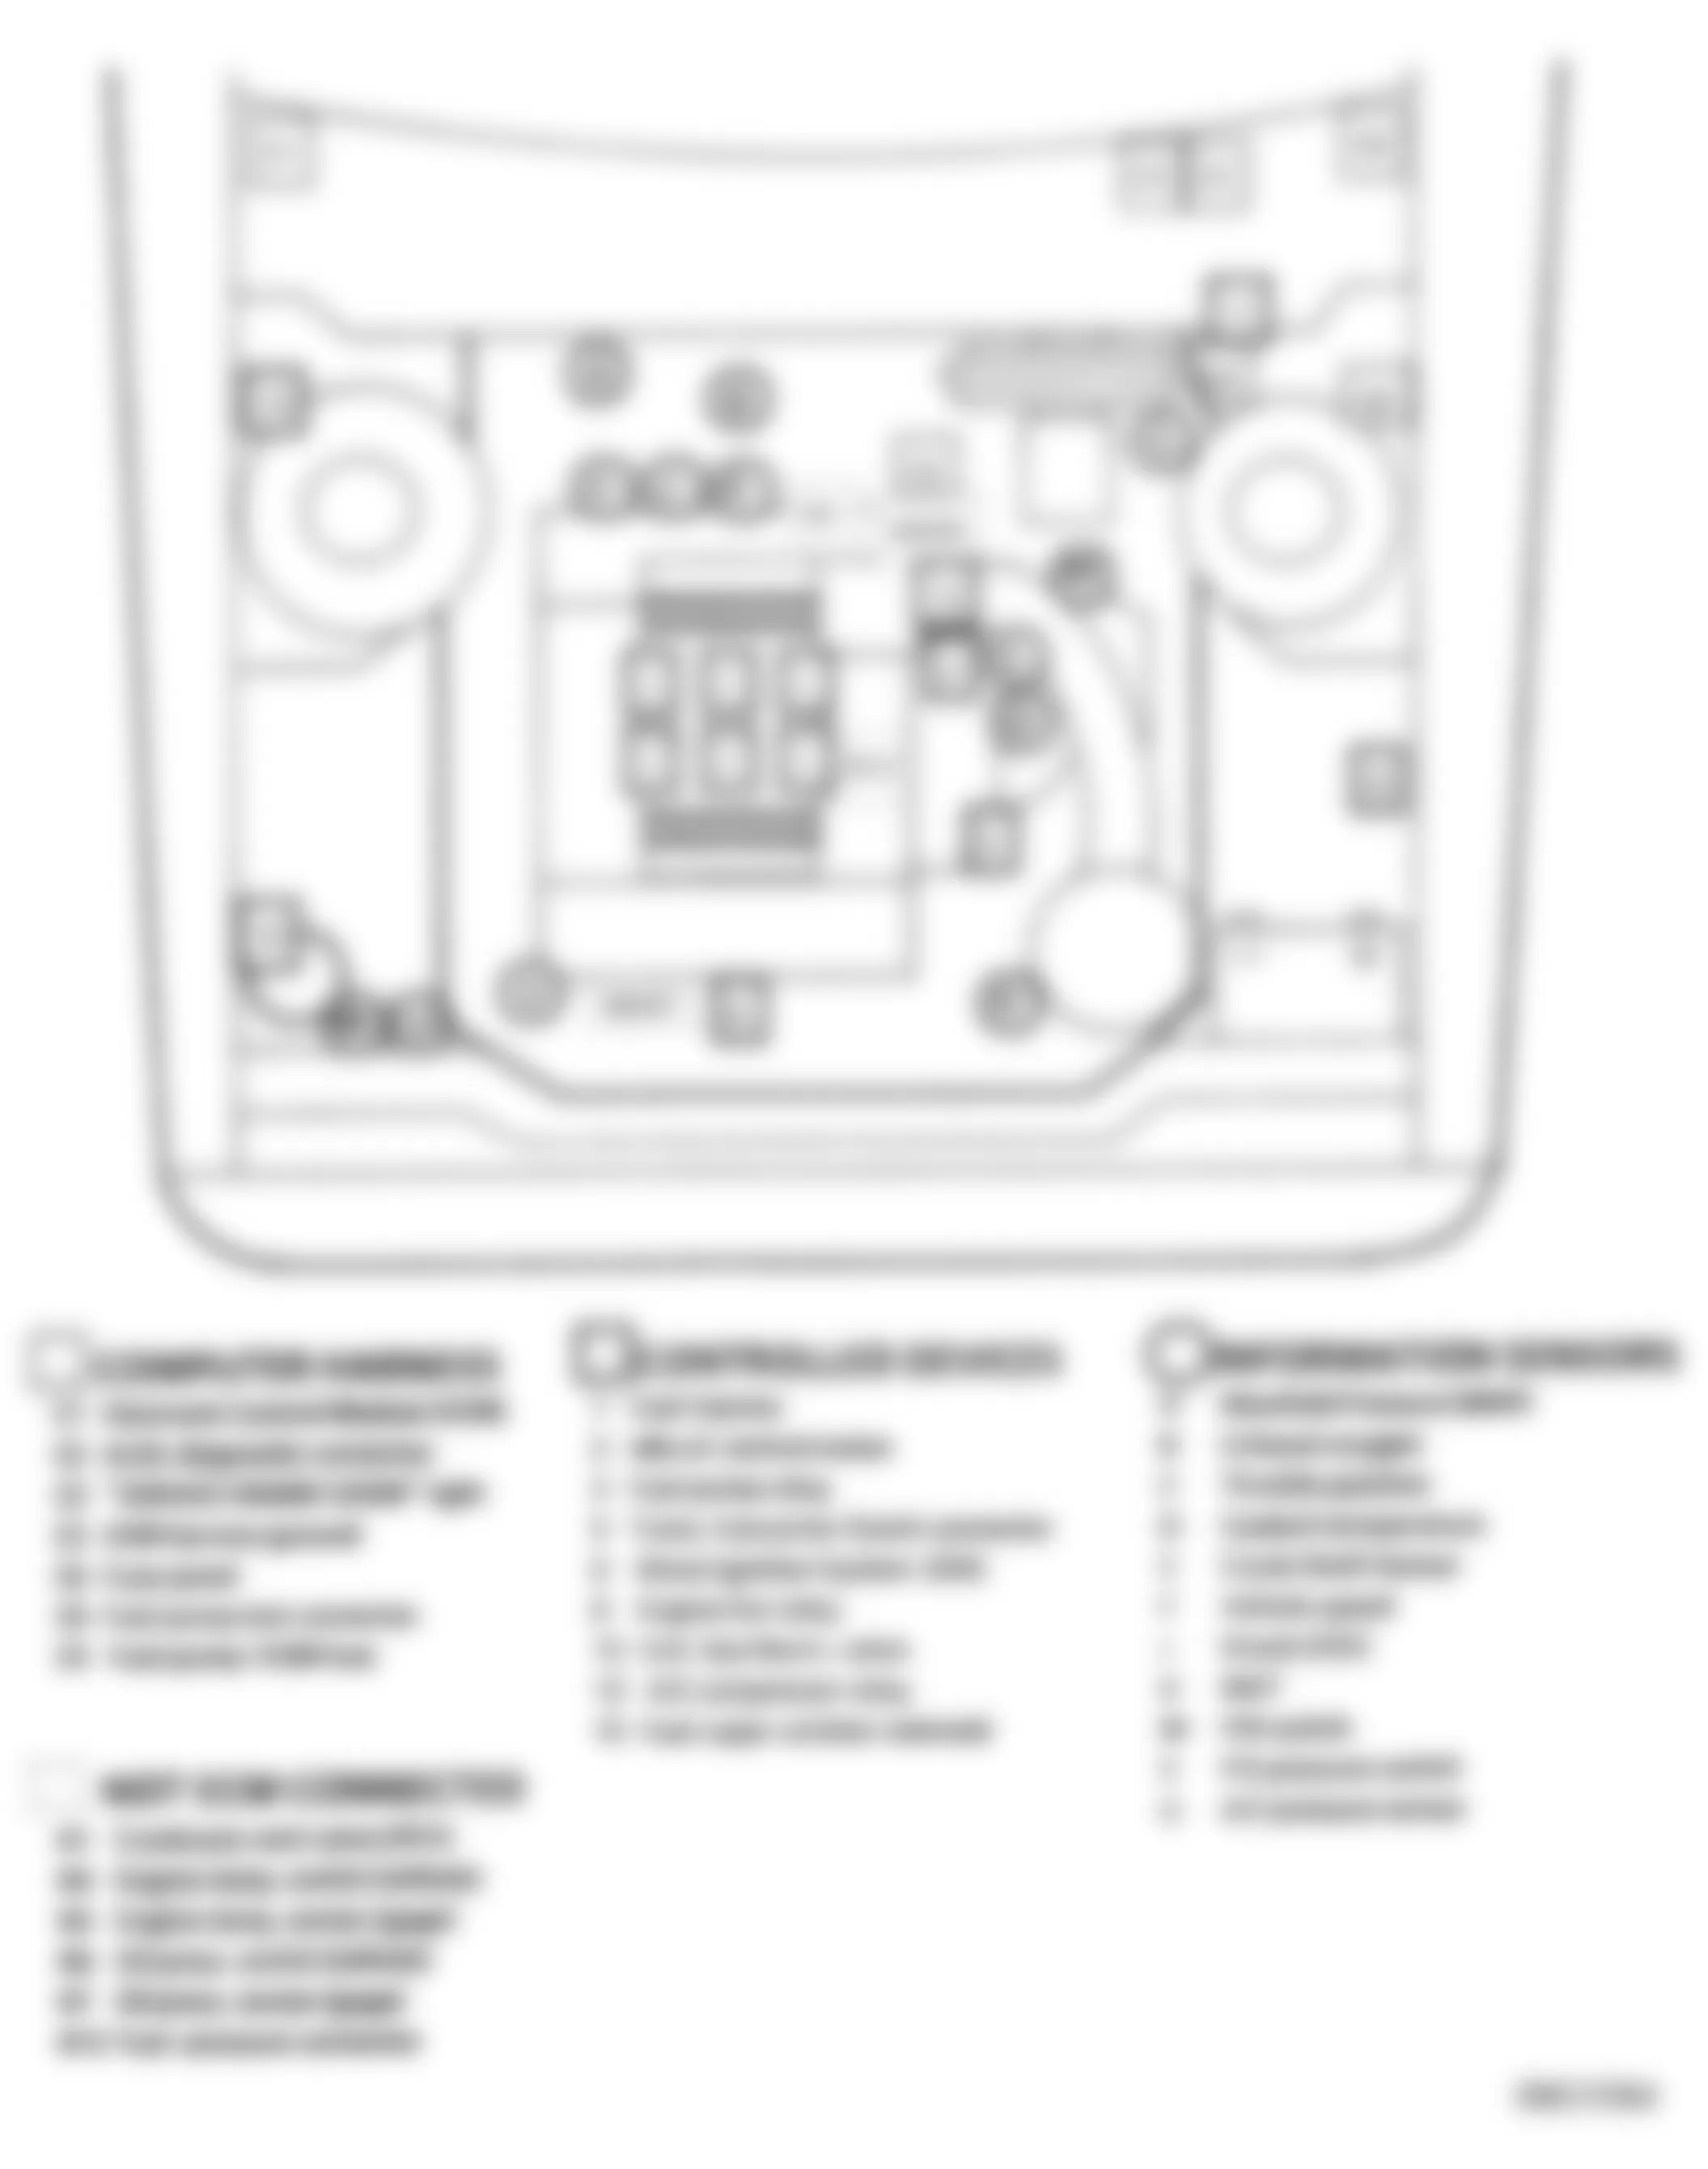 Chevrolet Cavalier VL 1990 - Component Locations -  Component Locations (4 Of 9)